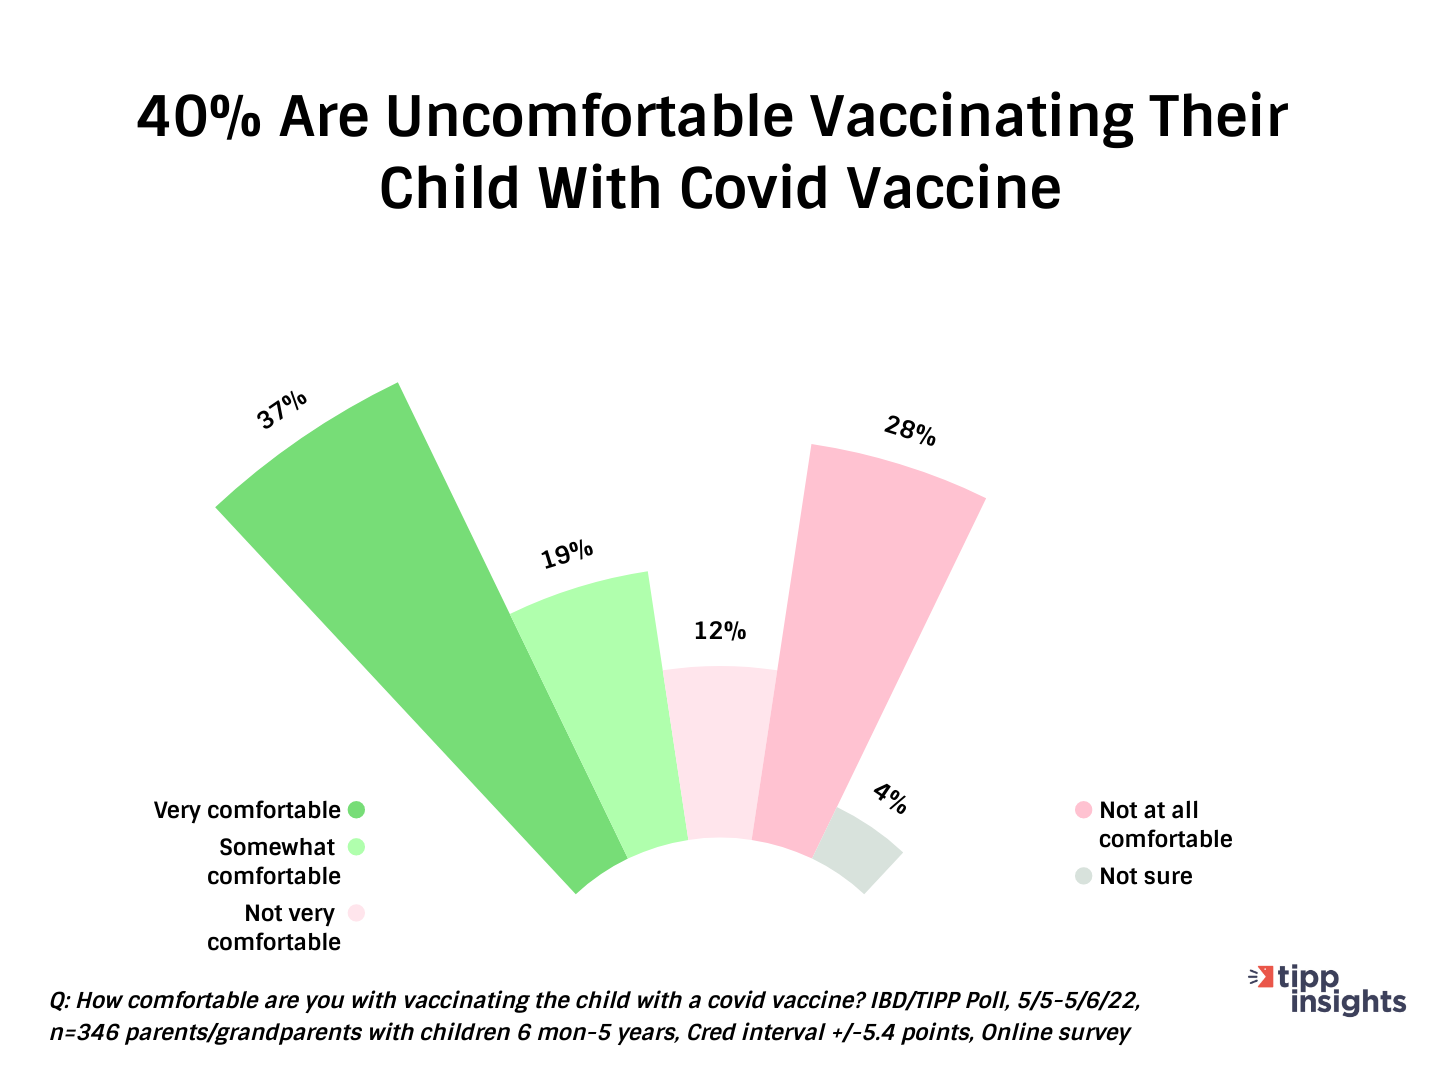 IBD/TIPP Poll Results conducted 5/5-5/6 How comfortable are are americans in vaccinating their kids?